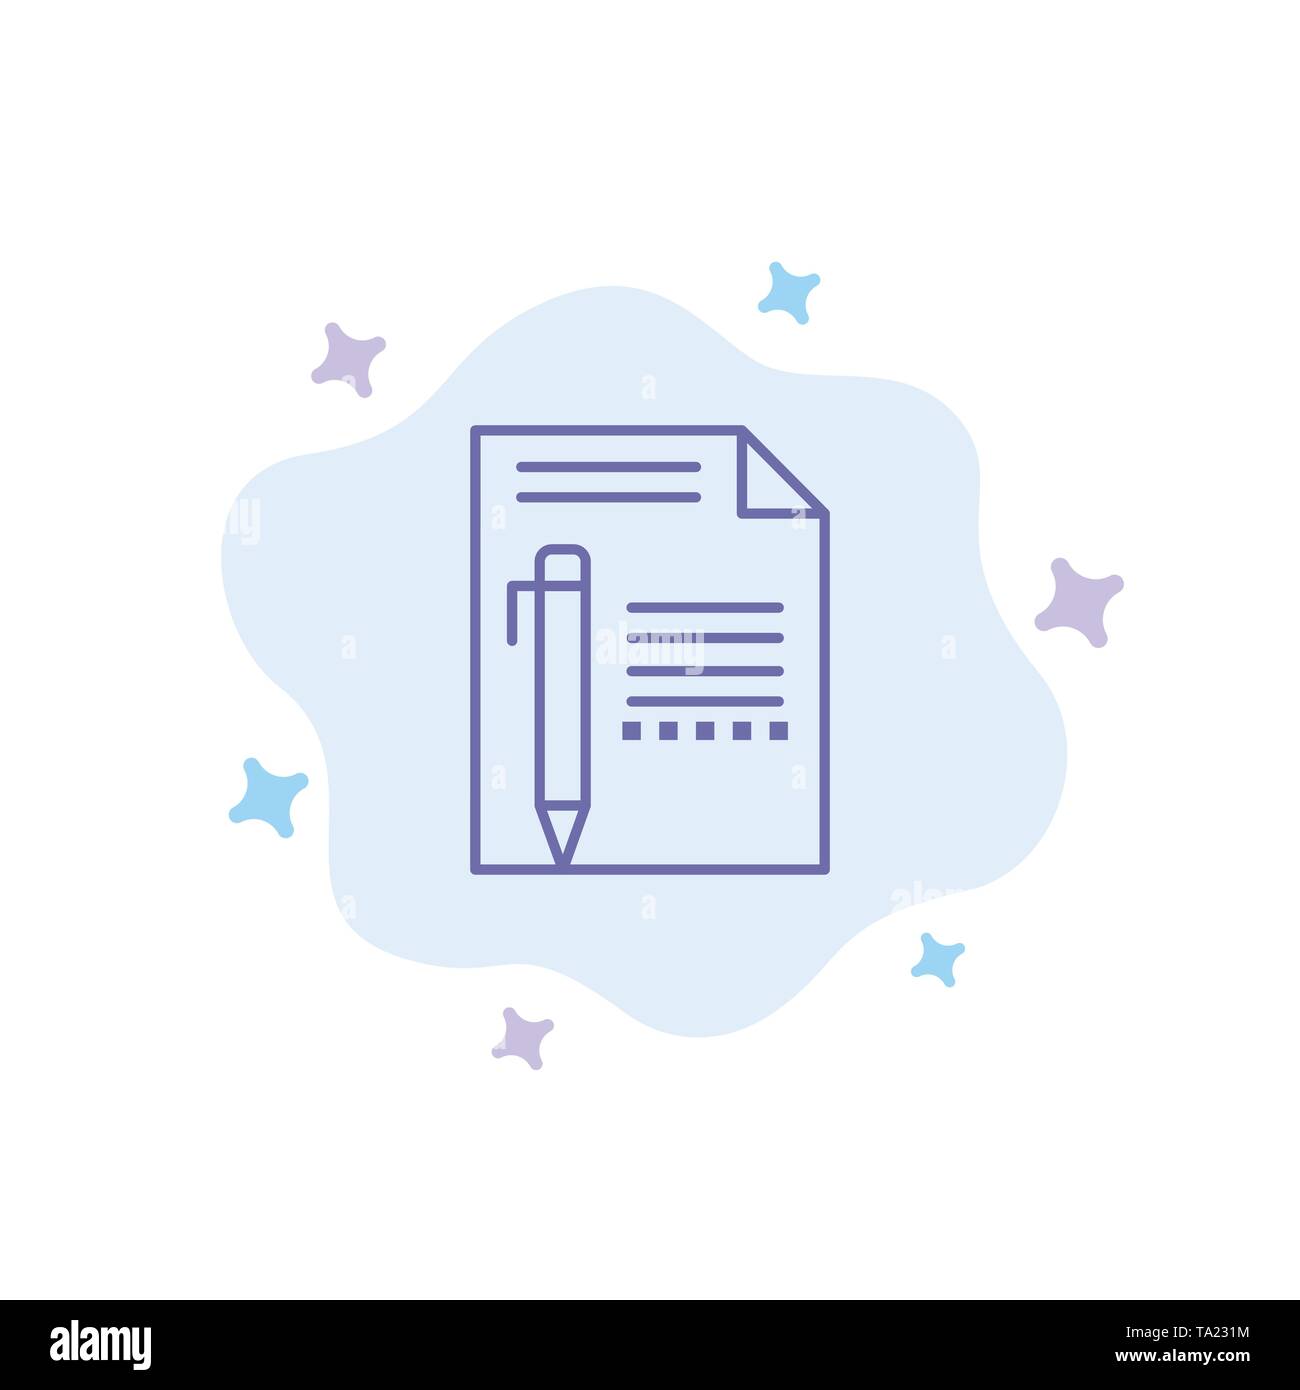 Document, Edit, Page, Paper, Pencil, Write Blue Icon on Abstract Cloud Background Stock Vector